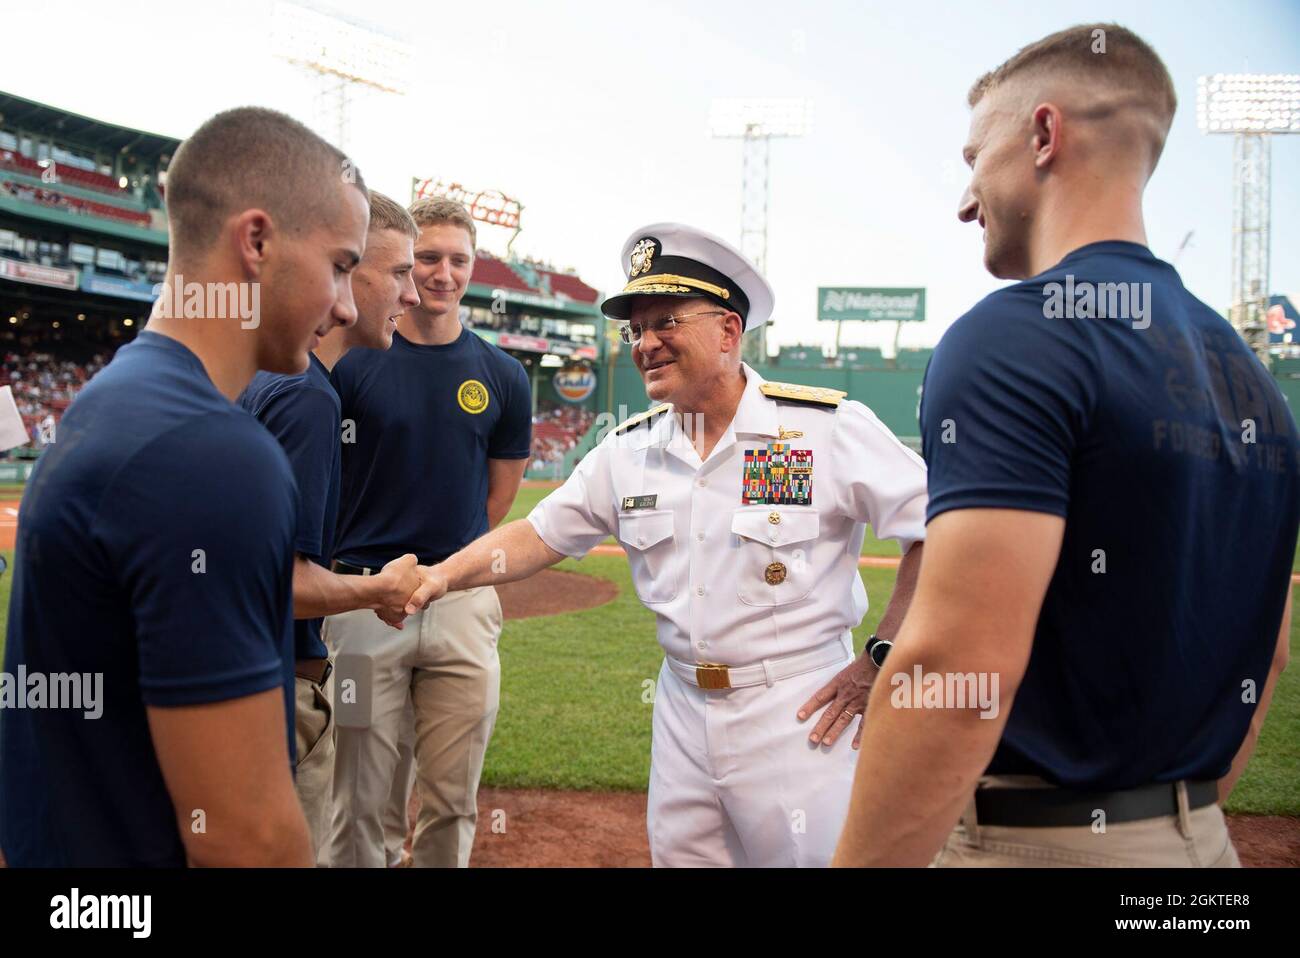 210629-N-BB269-1068 (June 29, 2021) Chief of Naval Operations Adm. Mike Gilday congratulates newly-enlisted Navy Sailors prior to a Red Sox baseball game at Fenway Park, Boston. Prior to the game, CNO administered the oath of enlistment to future U.S. Navy Sailors, Strike Fighter Squadron 213 (VFA-213) the Blacklions conducted a fly over, a Navy Band D.C. vocalist sang the national anthem, and the USS Constitution color guard paraded the colors in front of the audience. Stock Photo